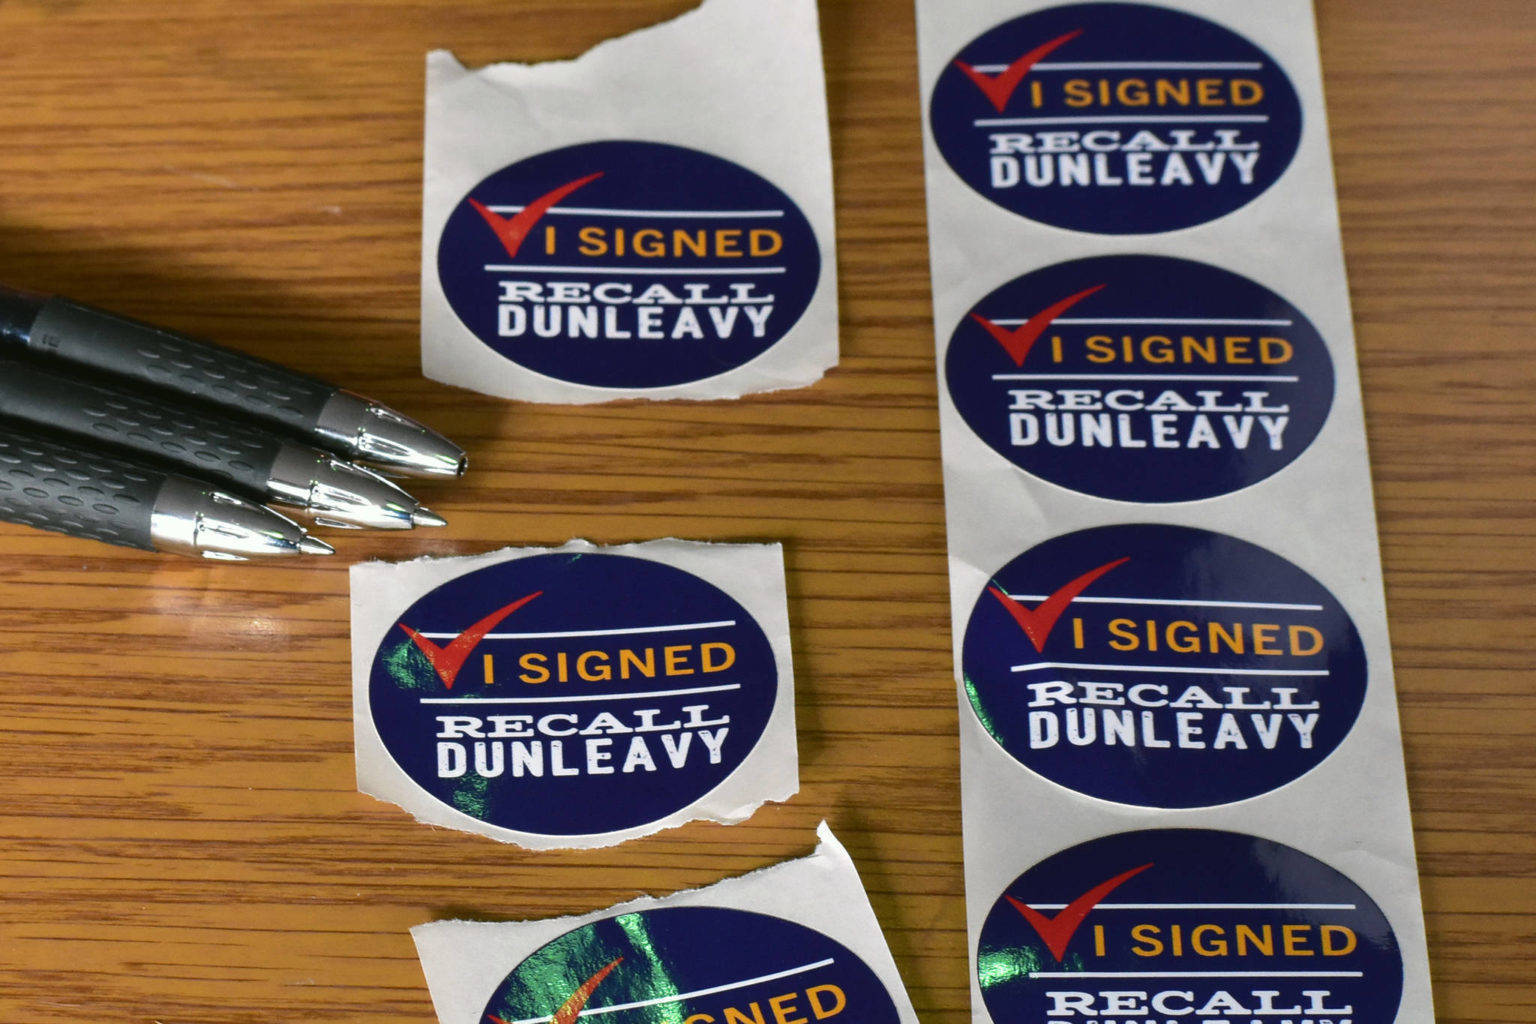 The campaign to recall Gov. Mike Dunleavy announced it was stopping the effort with a gubernatorial race looming next year. The Recall Dunleavy group said that as of Saturday it had gathered 62,373 signatures, shy of the 71,252 needed to trigger a recall vote. (Peter Segall / Juneau Empire File)